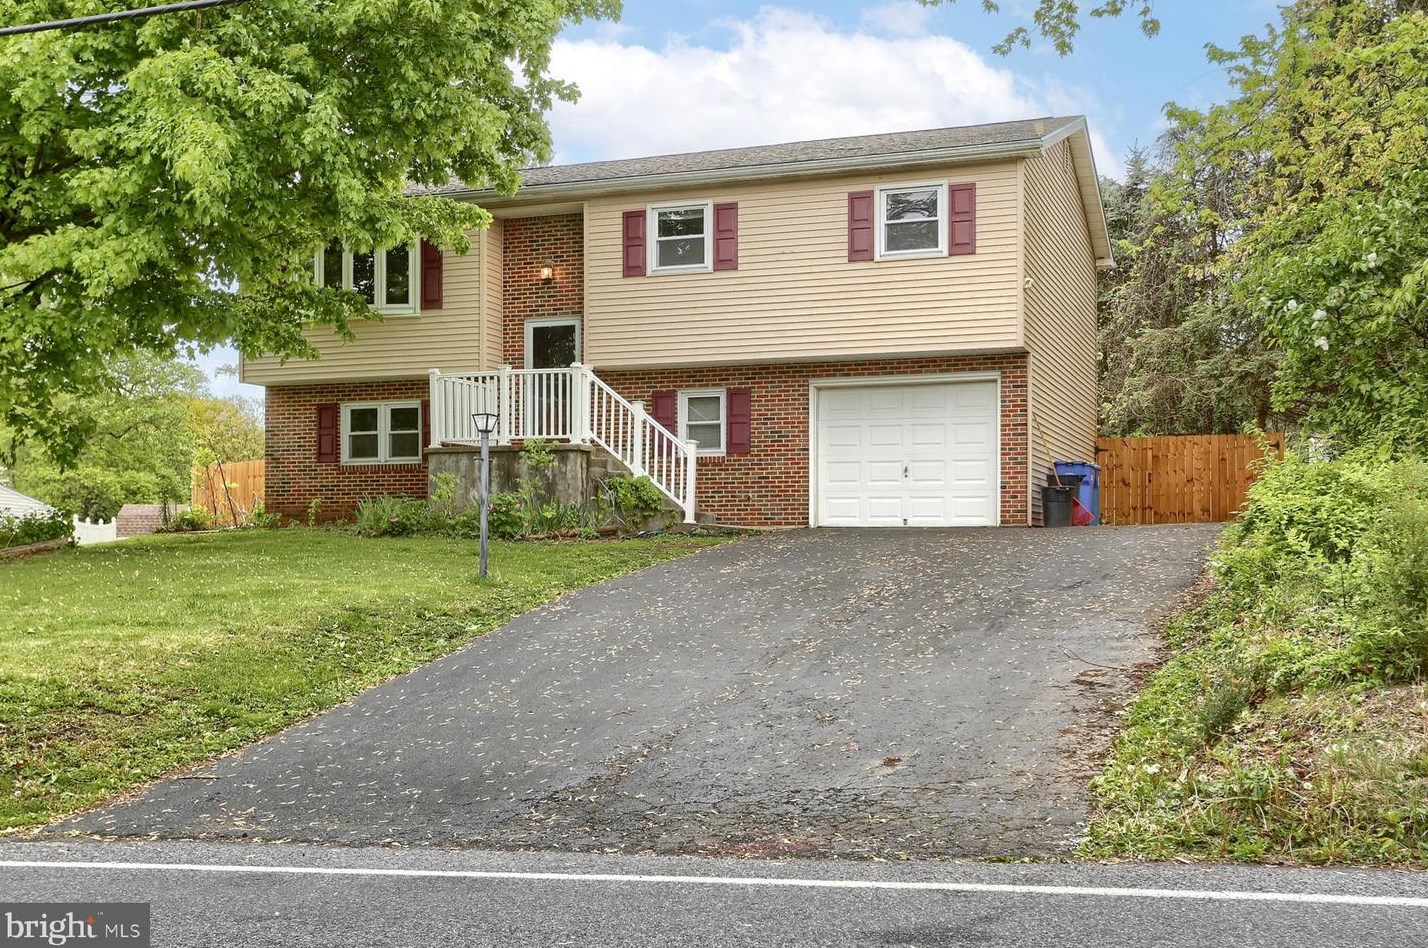 170 Taylor Rd, Etters, PA 17319